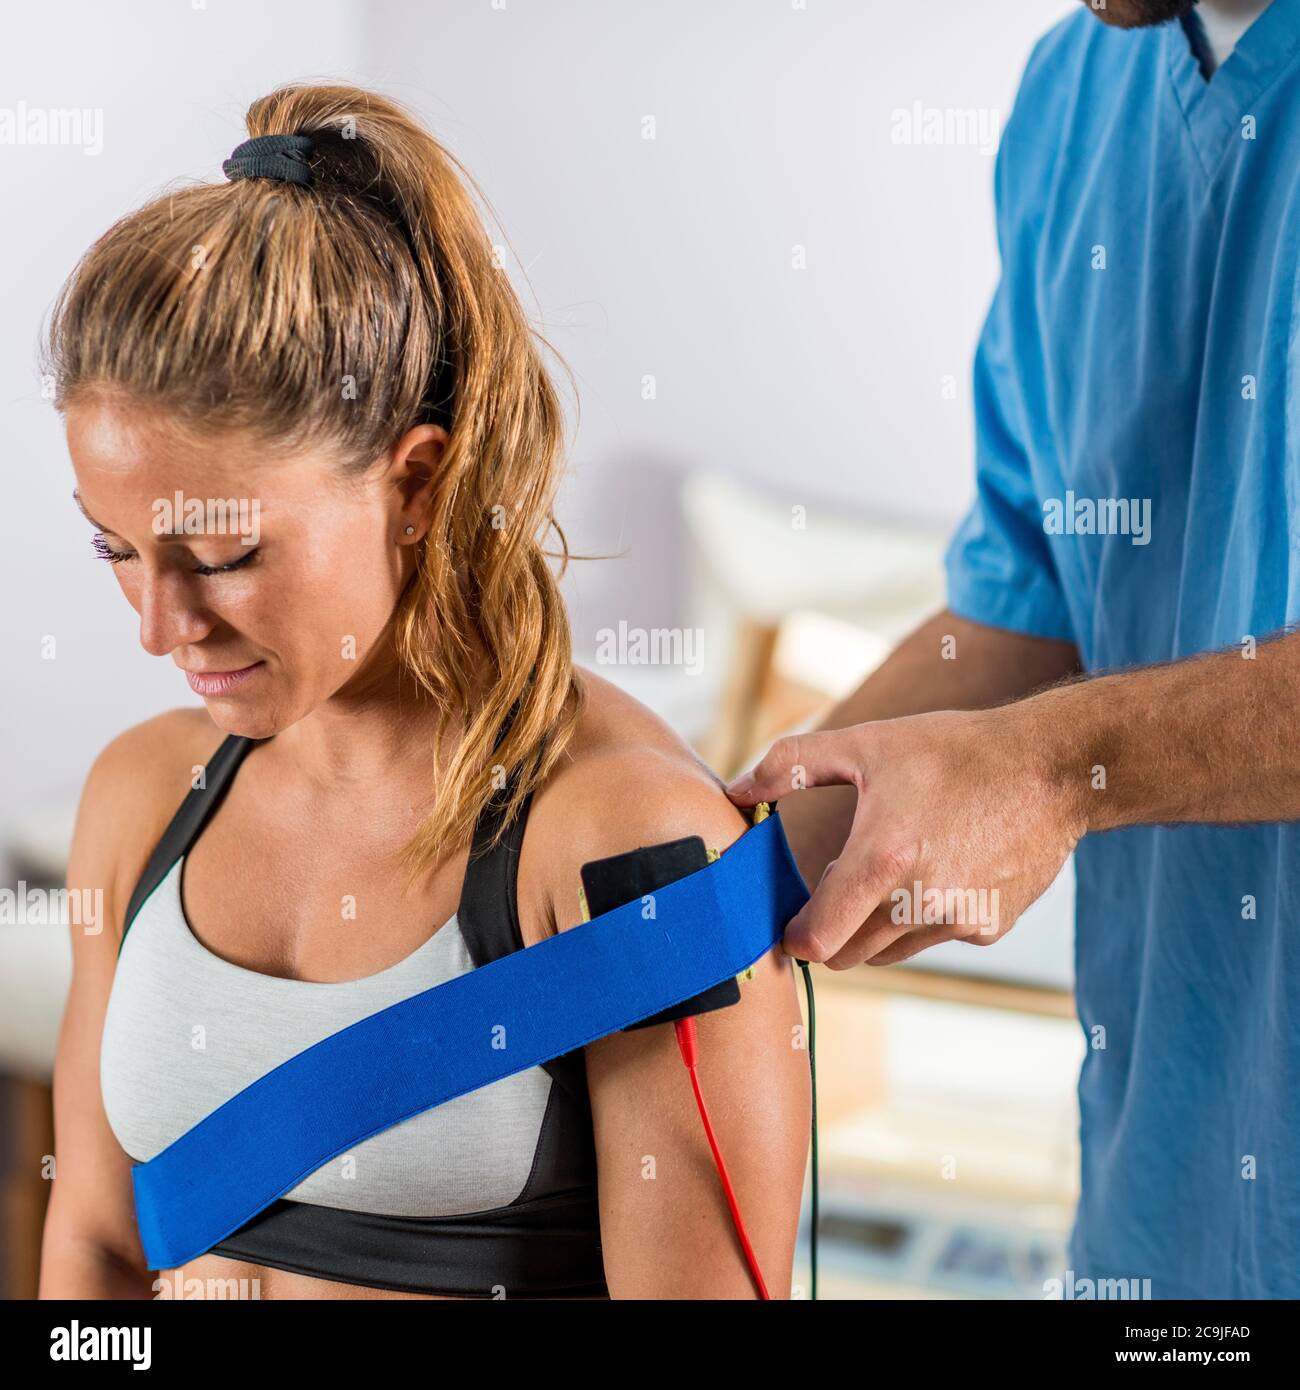 https://c8.alamy.com/comp/2C9JFAD/electrical-muscle-stimulation-in-physical-therapy-therapist-positioning-electrodes-on-a-patients-shoulder-2C9JFAD.jpg